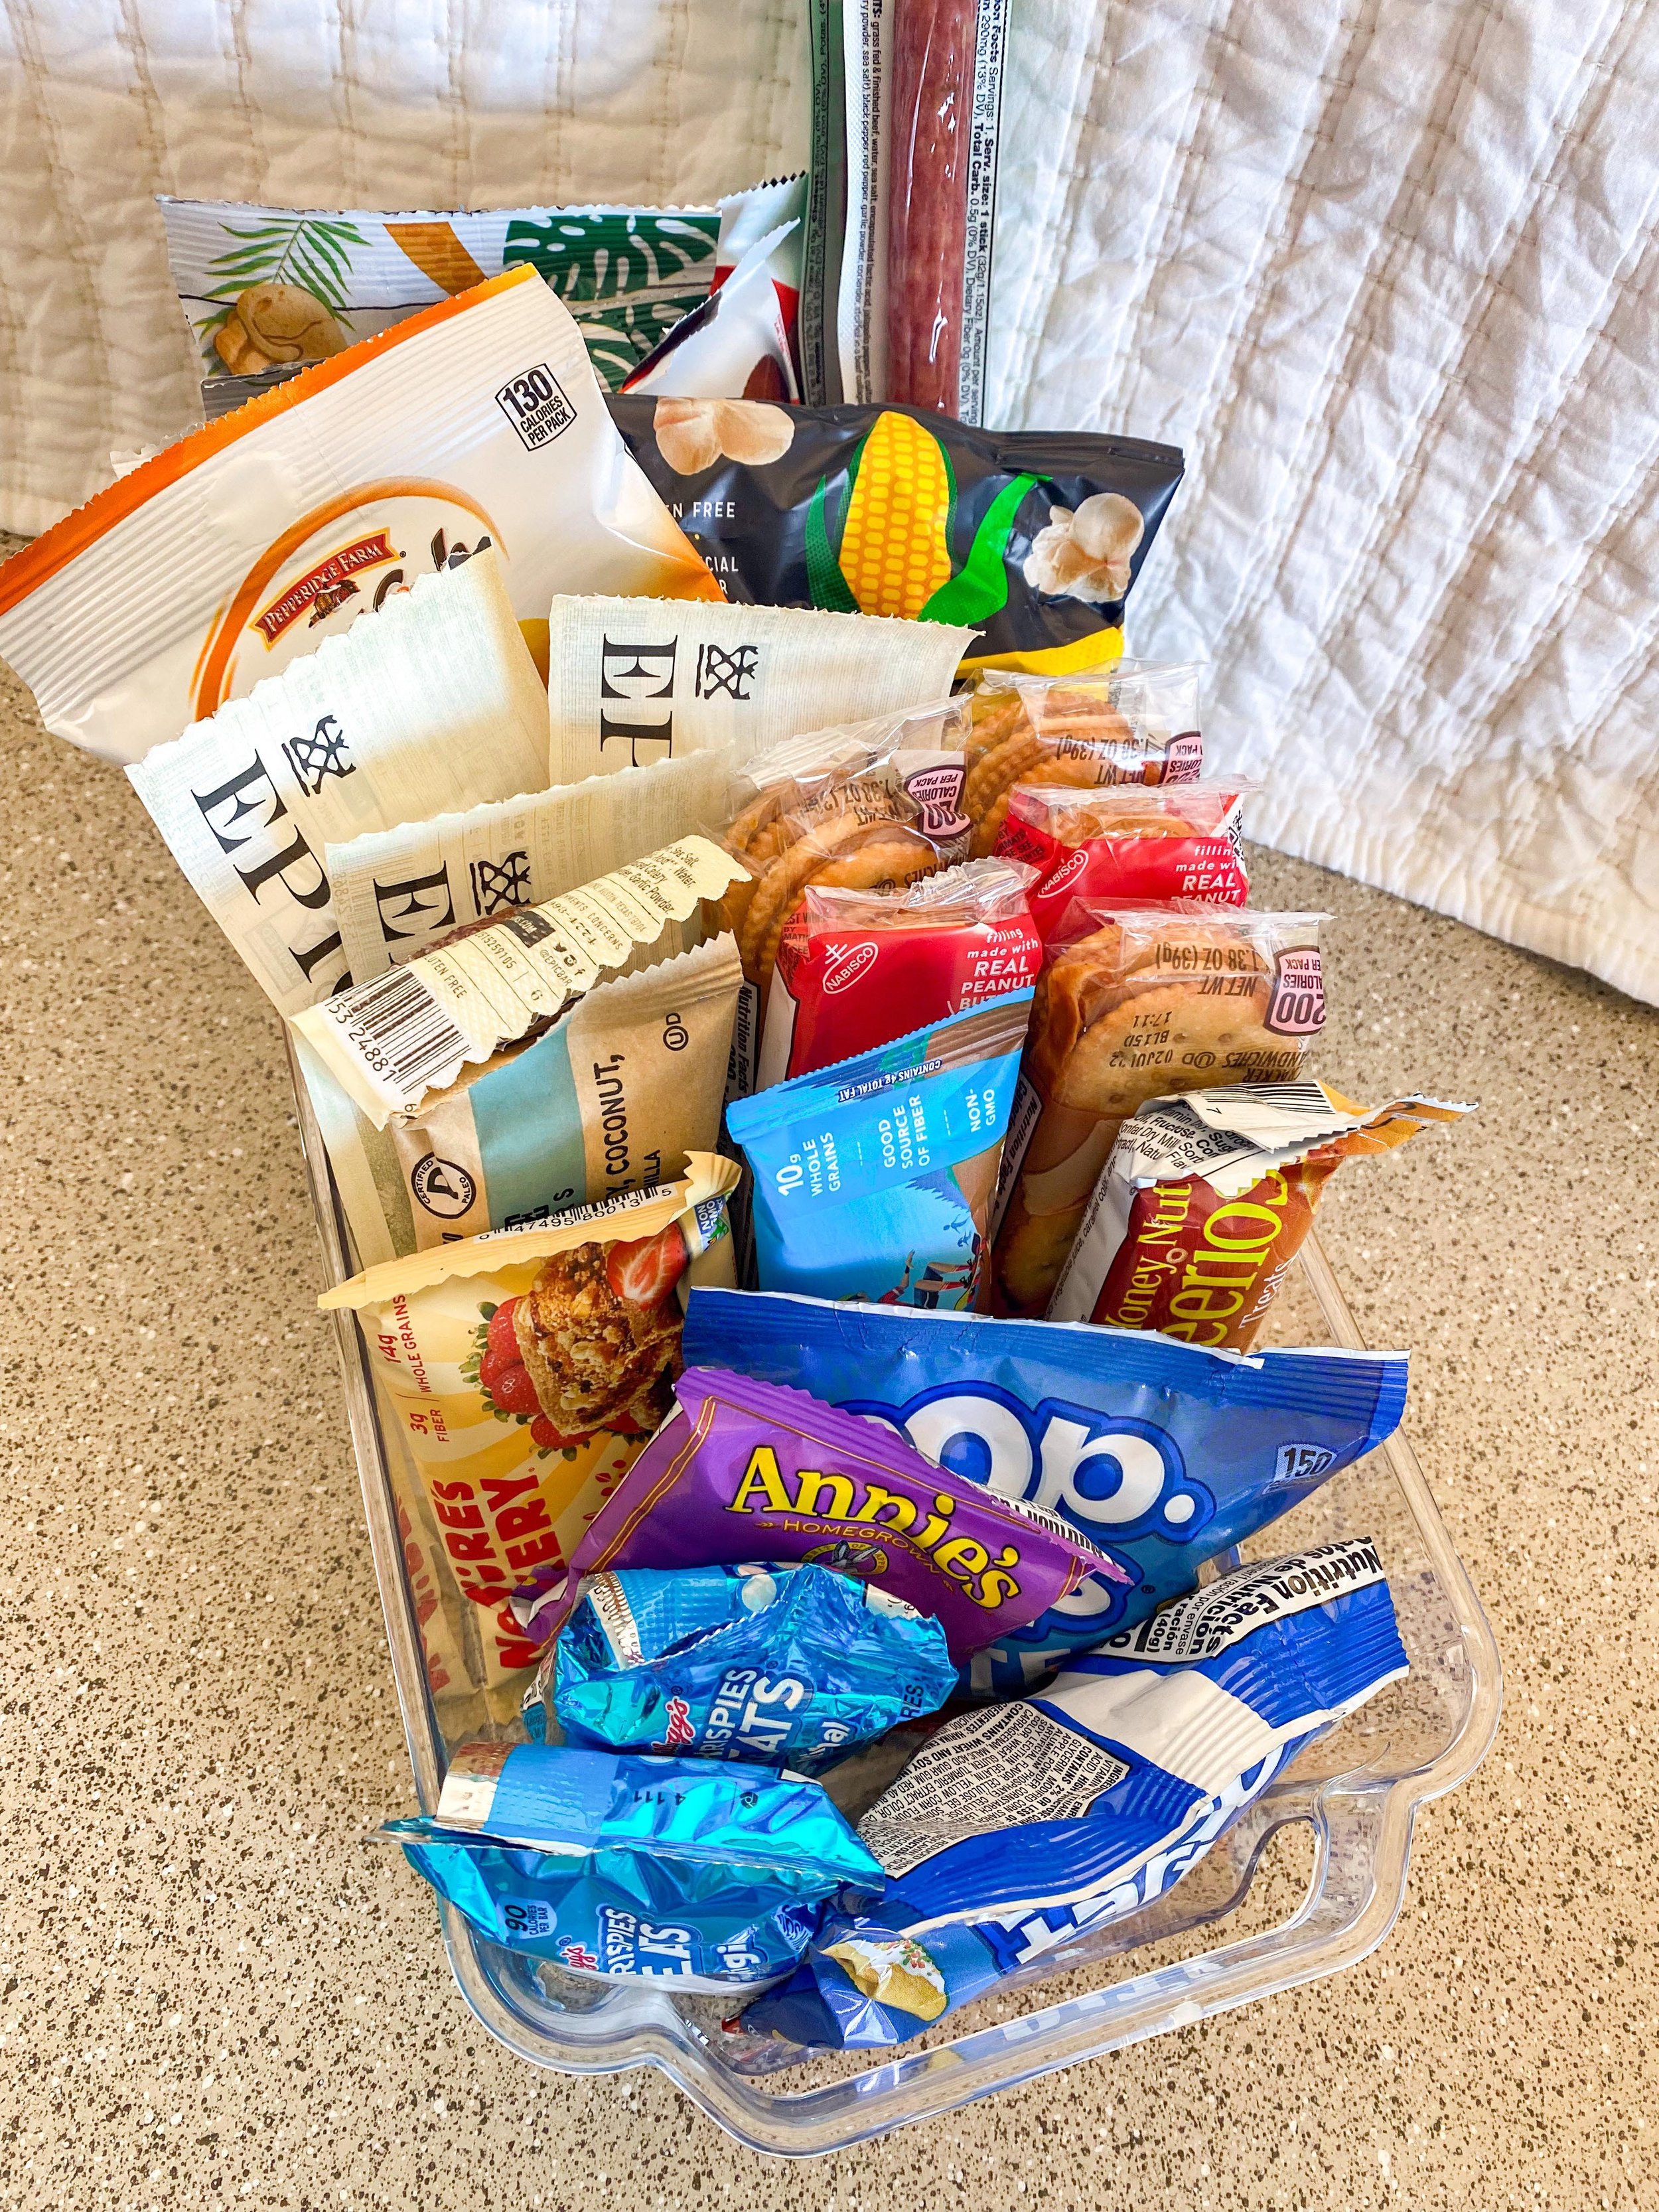 Toddler friendly road trip snack box! A great way for little ones